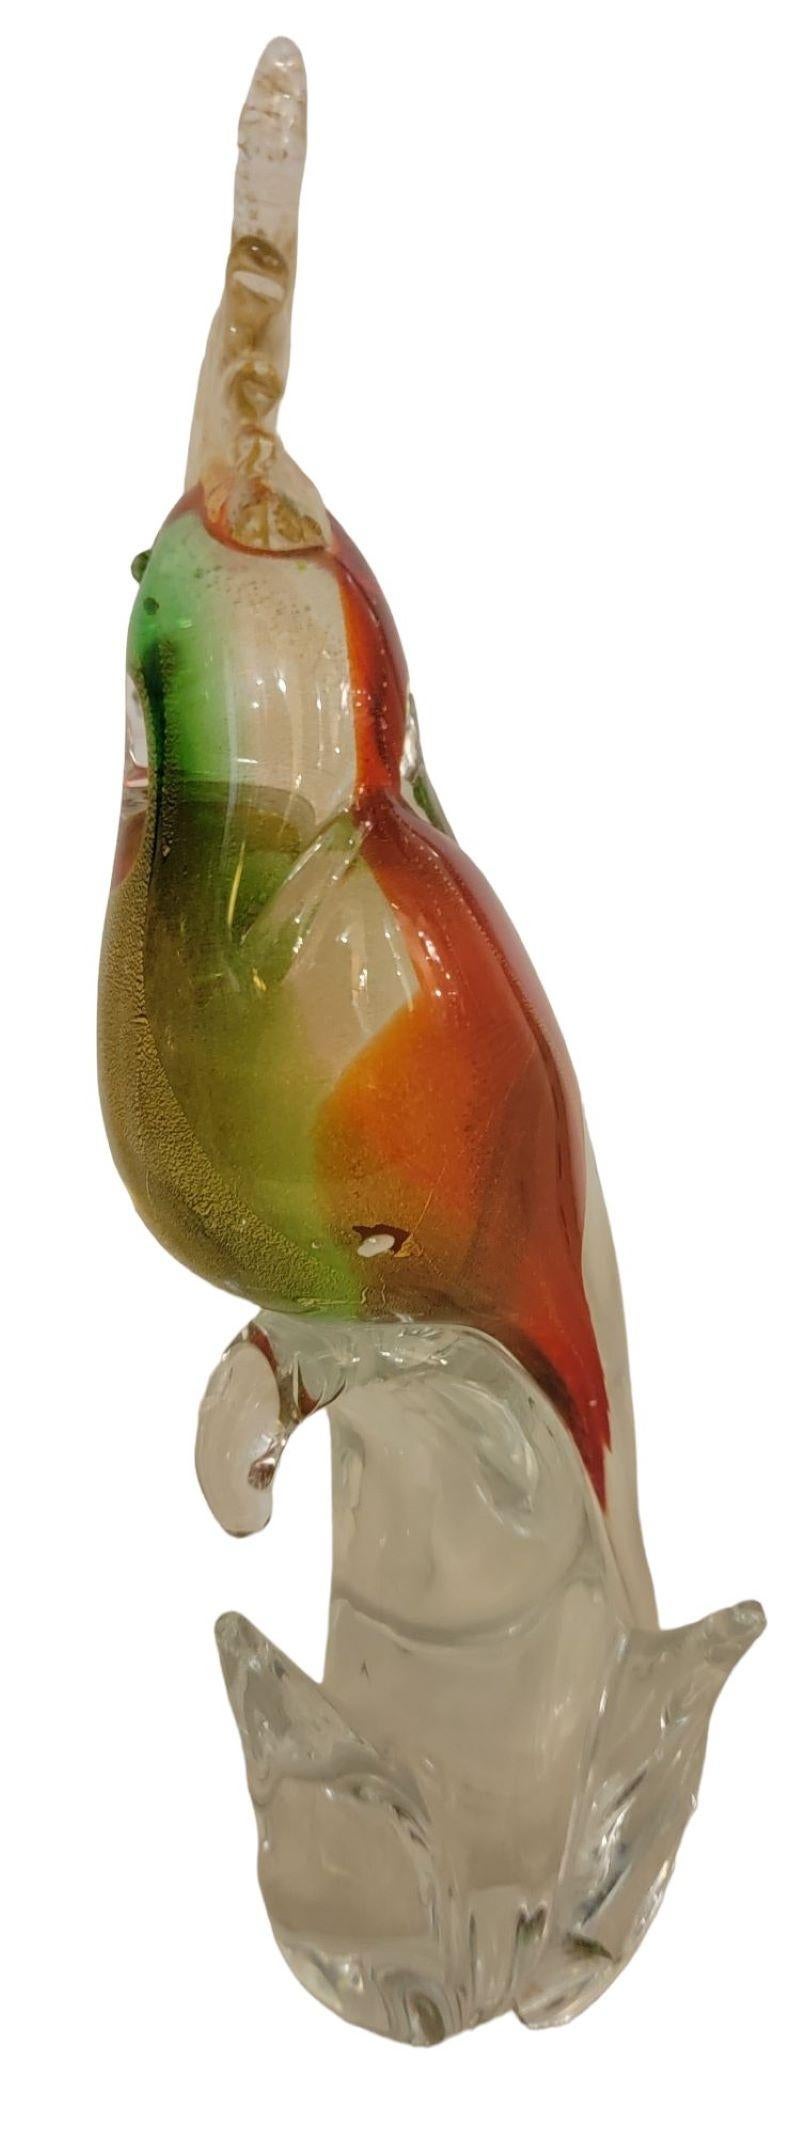 Gold Fleck Venezia Murano Parrot with beautiful red, green and yellow glass that are hand blown and very well proportioned to an actual bird. The glass is stunning with gold fleck within the glass.

Measures 12h x 4w.